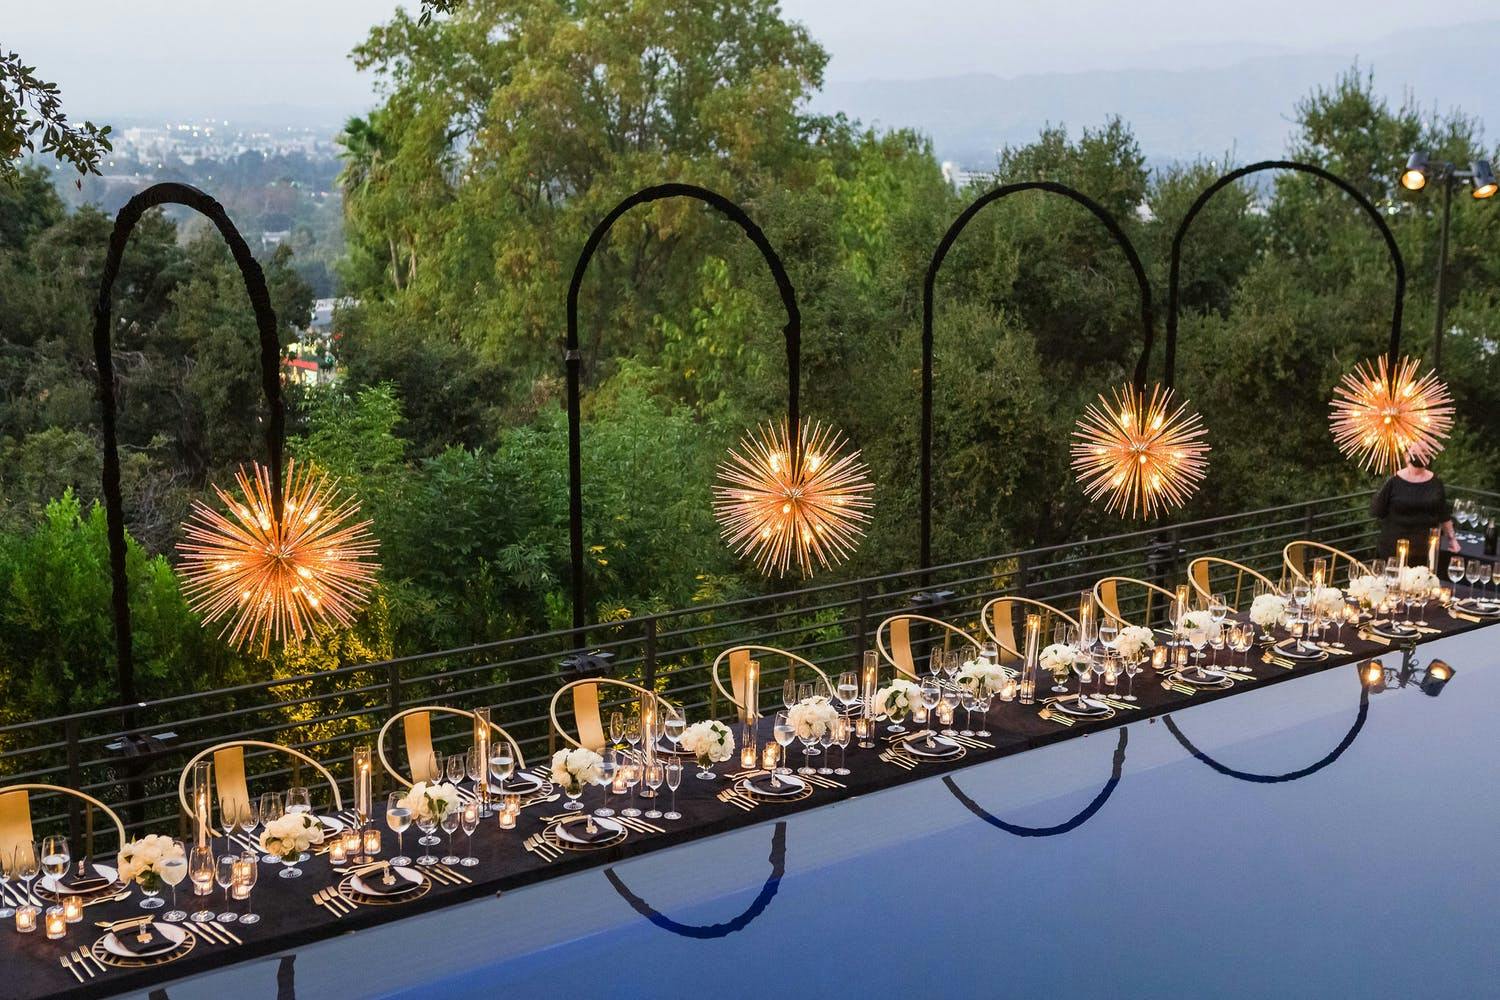 Outdoor Tablescape With Sputnik Lighting for Star Wars 50th Birthday Party Themes | PartySlate